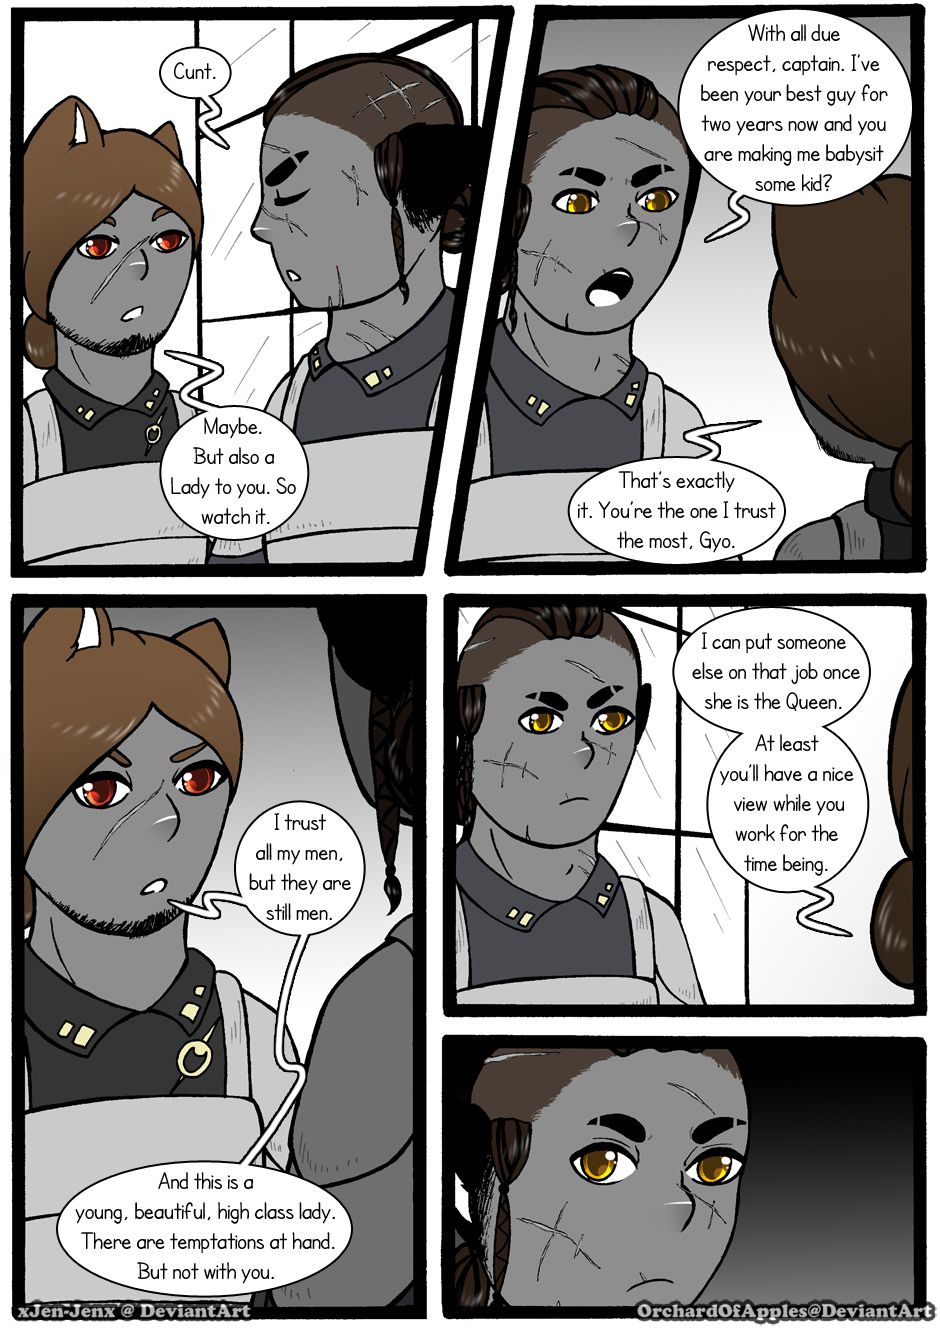 [Jeny-jen94] Between Kings and Queens [Ongoing] 205